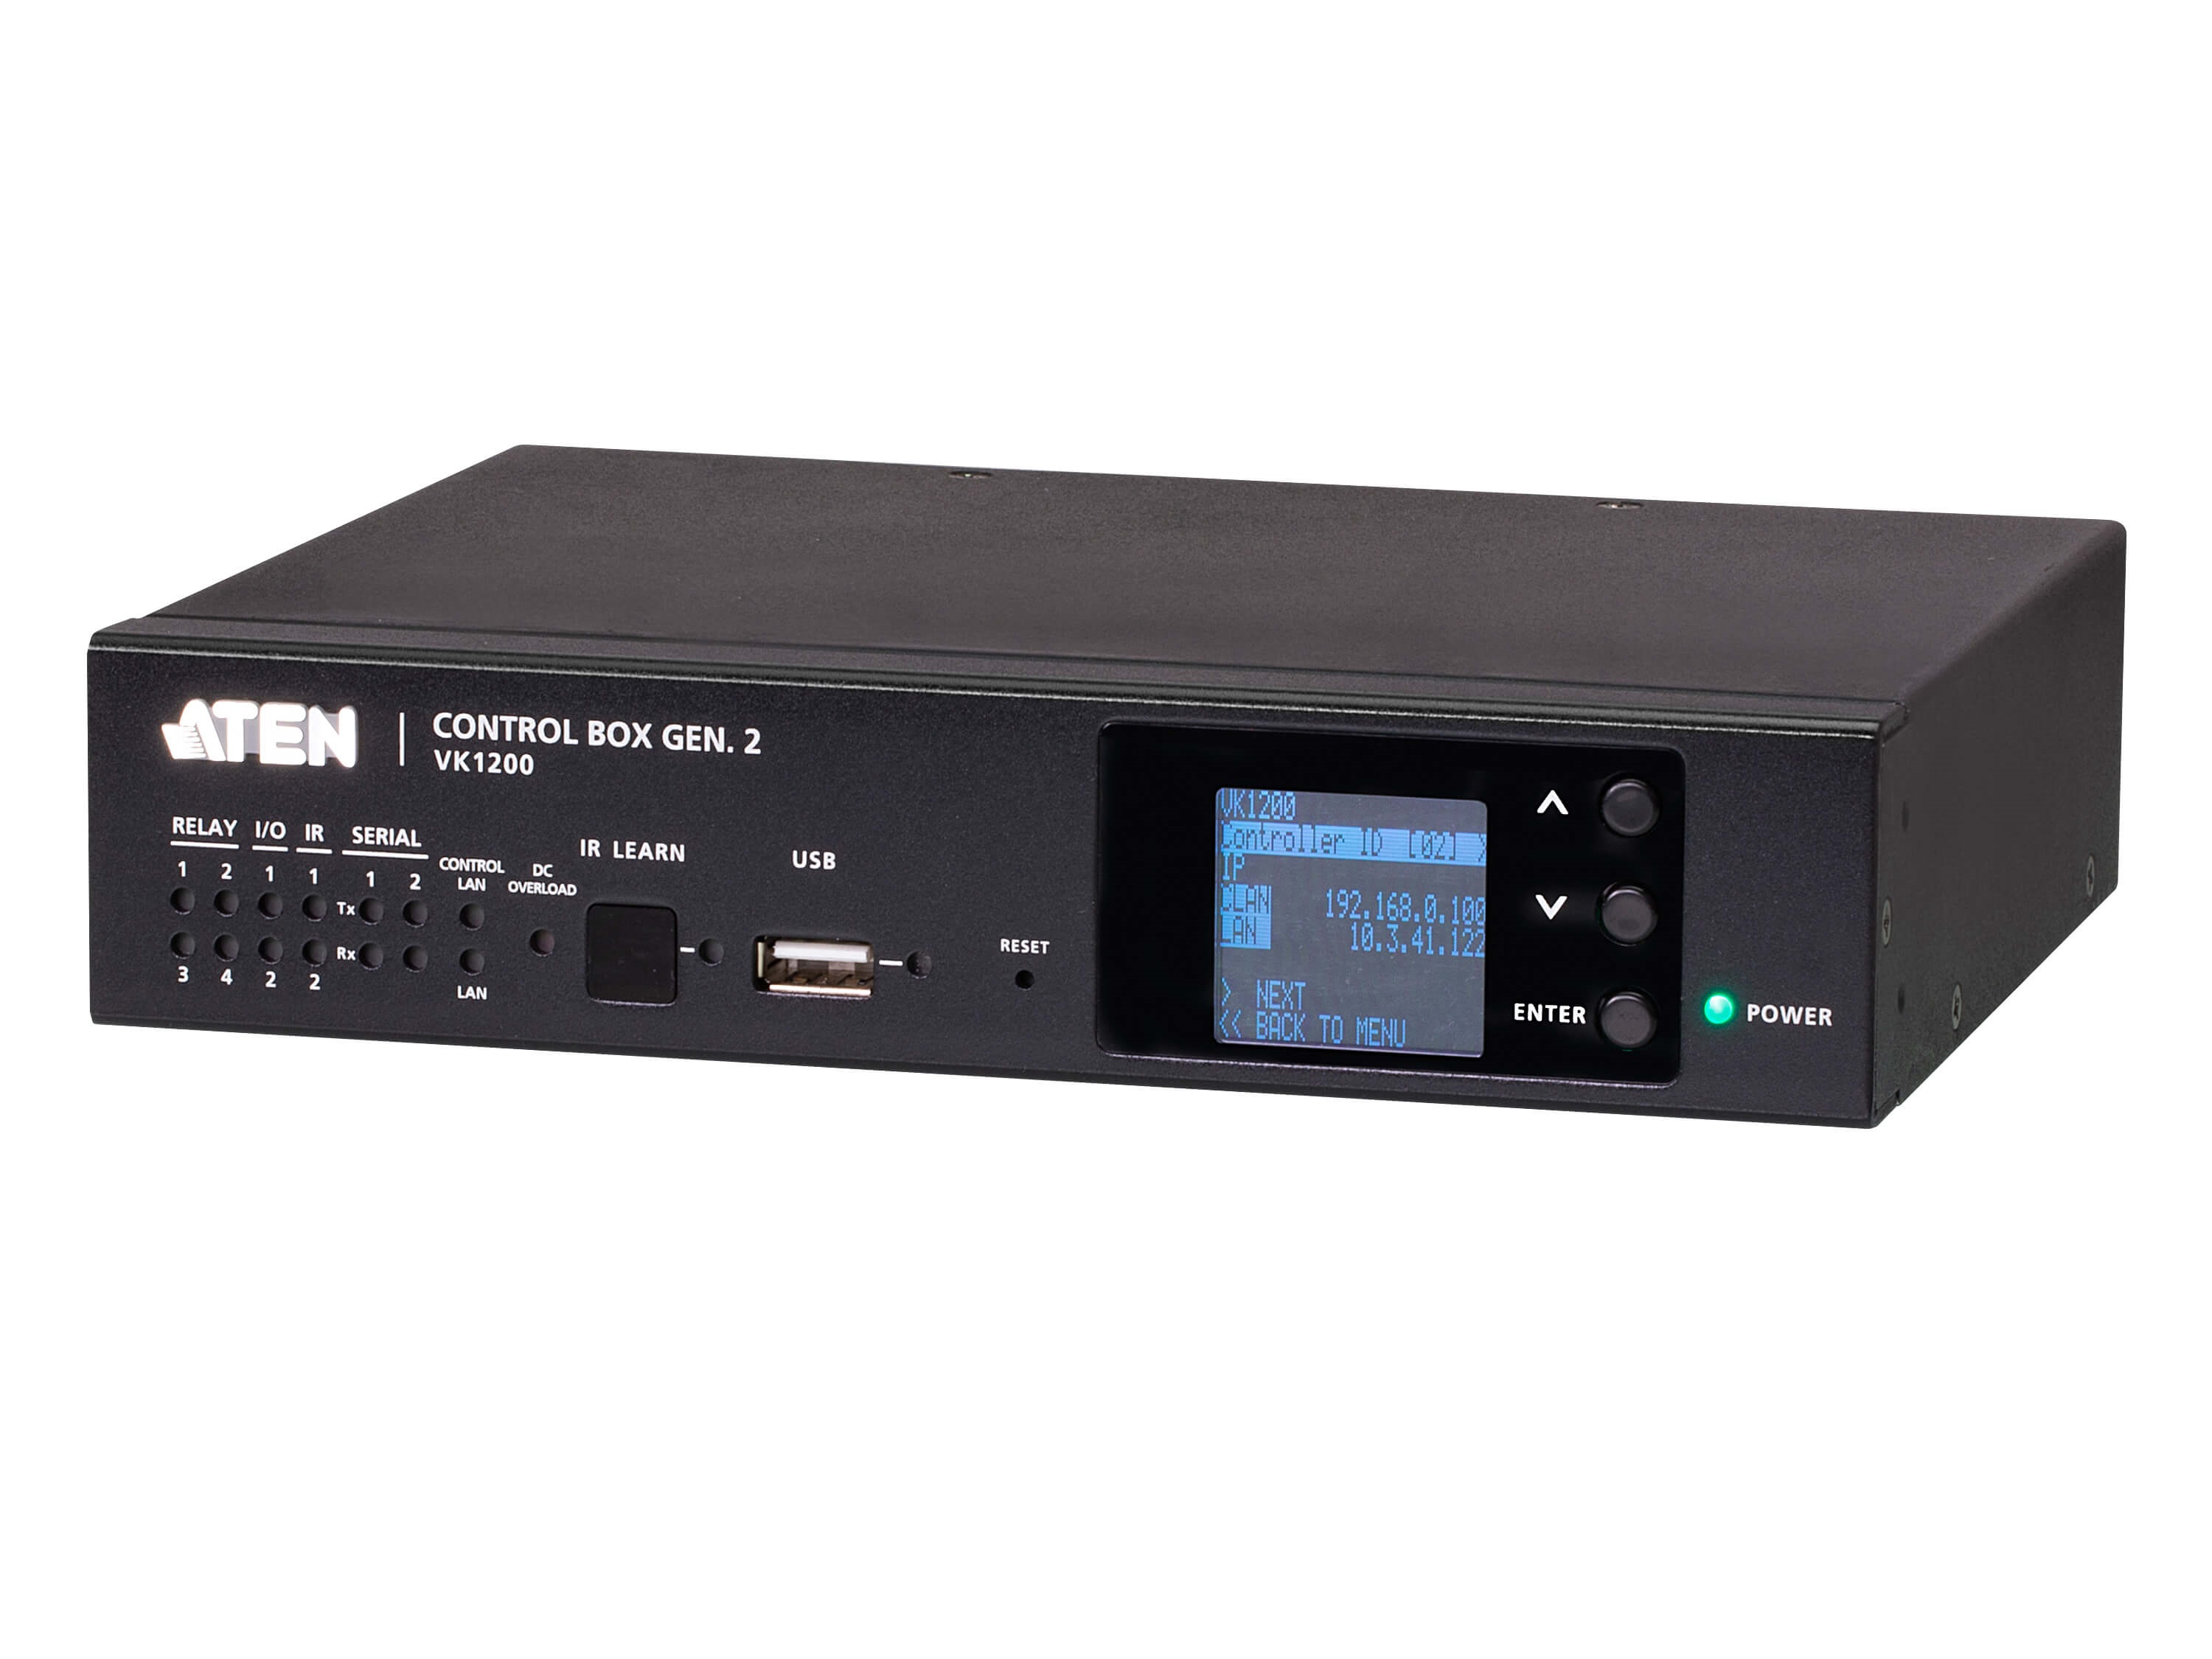 VK1200 Control System/Compact Control Box Gen/2 with Dual LAN by Aten